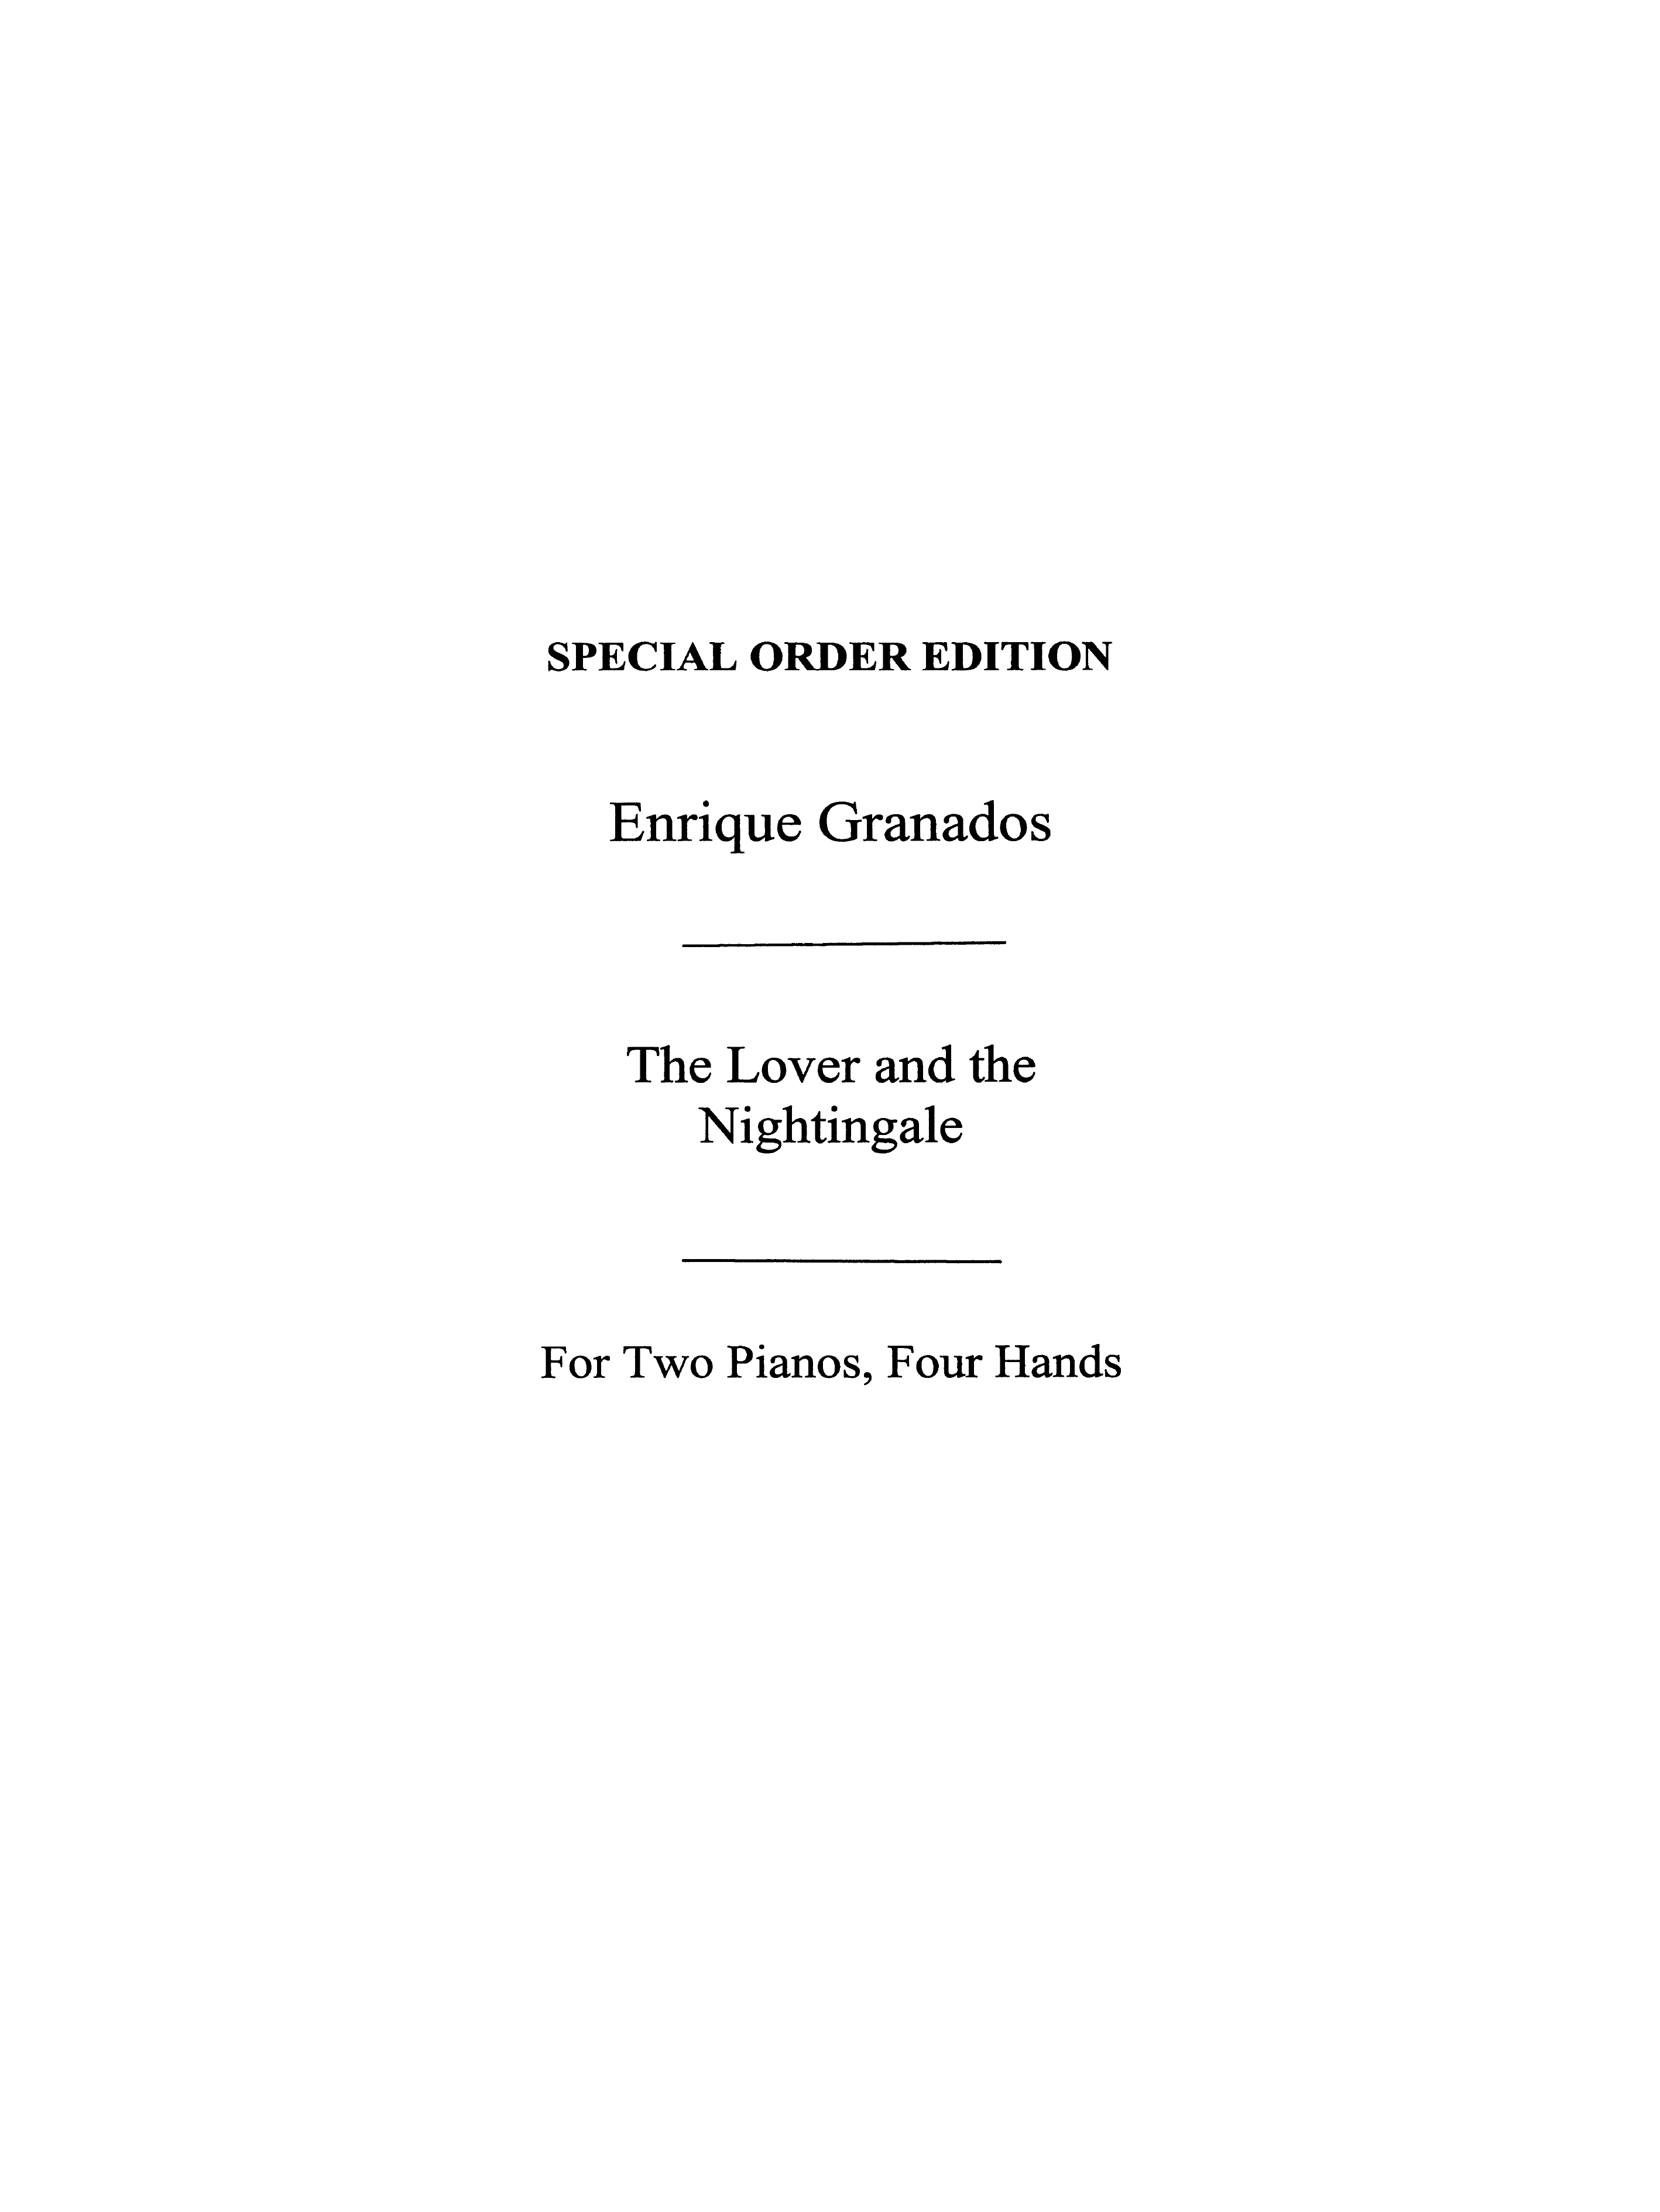 Enrique Granados: The Lover and the Nightingale For Two Pianos: Piano Duet: